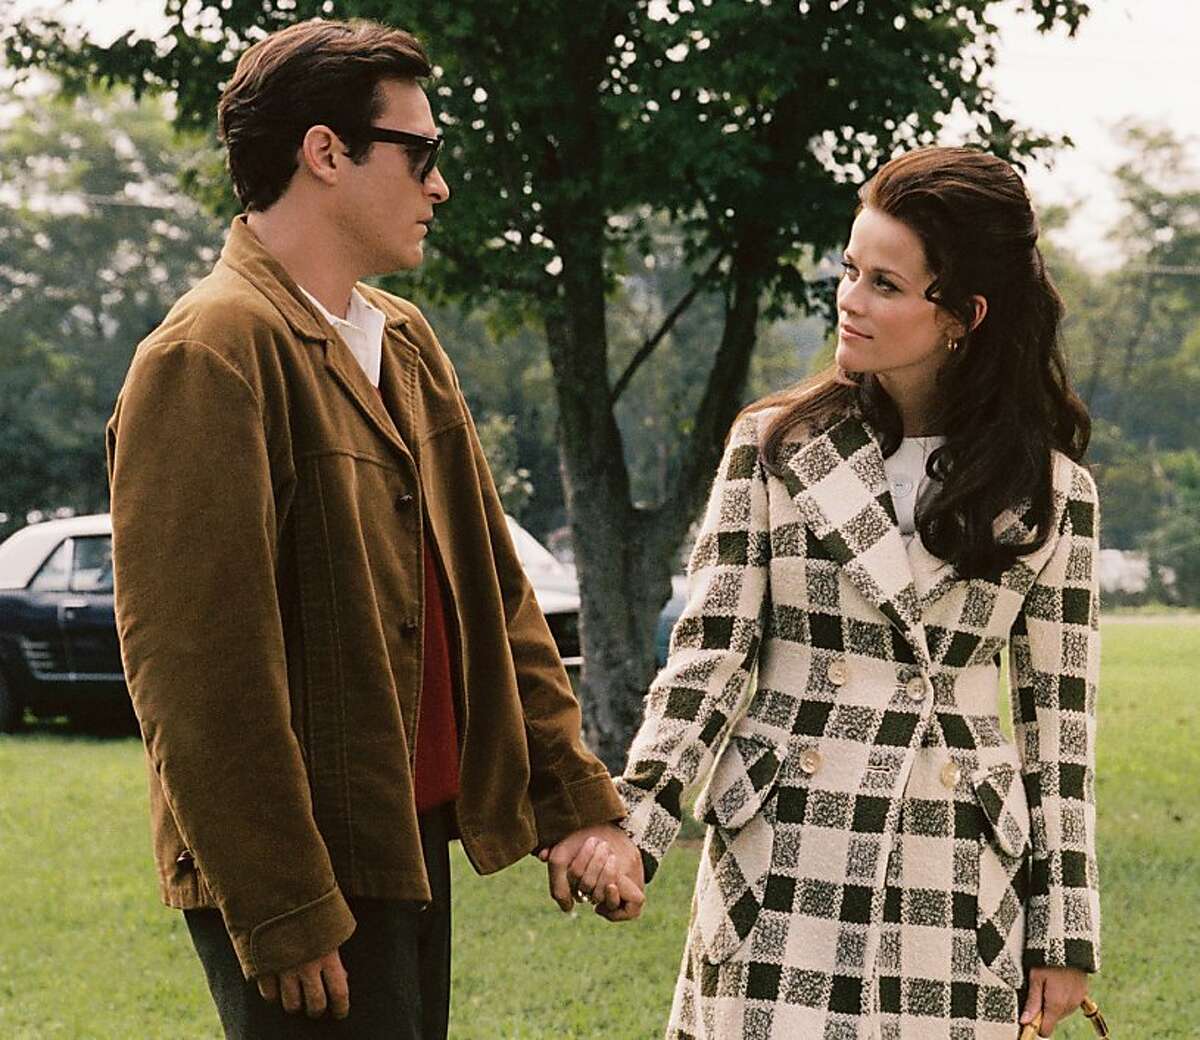 This undated publicity photo provided by Twentieth Century Fox shows actors Joaquin Phoenix, left, and Reese Witherspoon who portray Johnny Cash and June Carter in "Walk The Line." (AP Photo/Twentieth Century Fox, Suzanne Tenner)